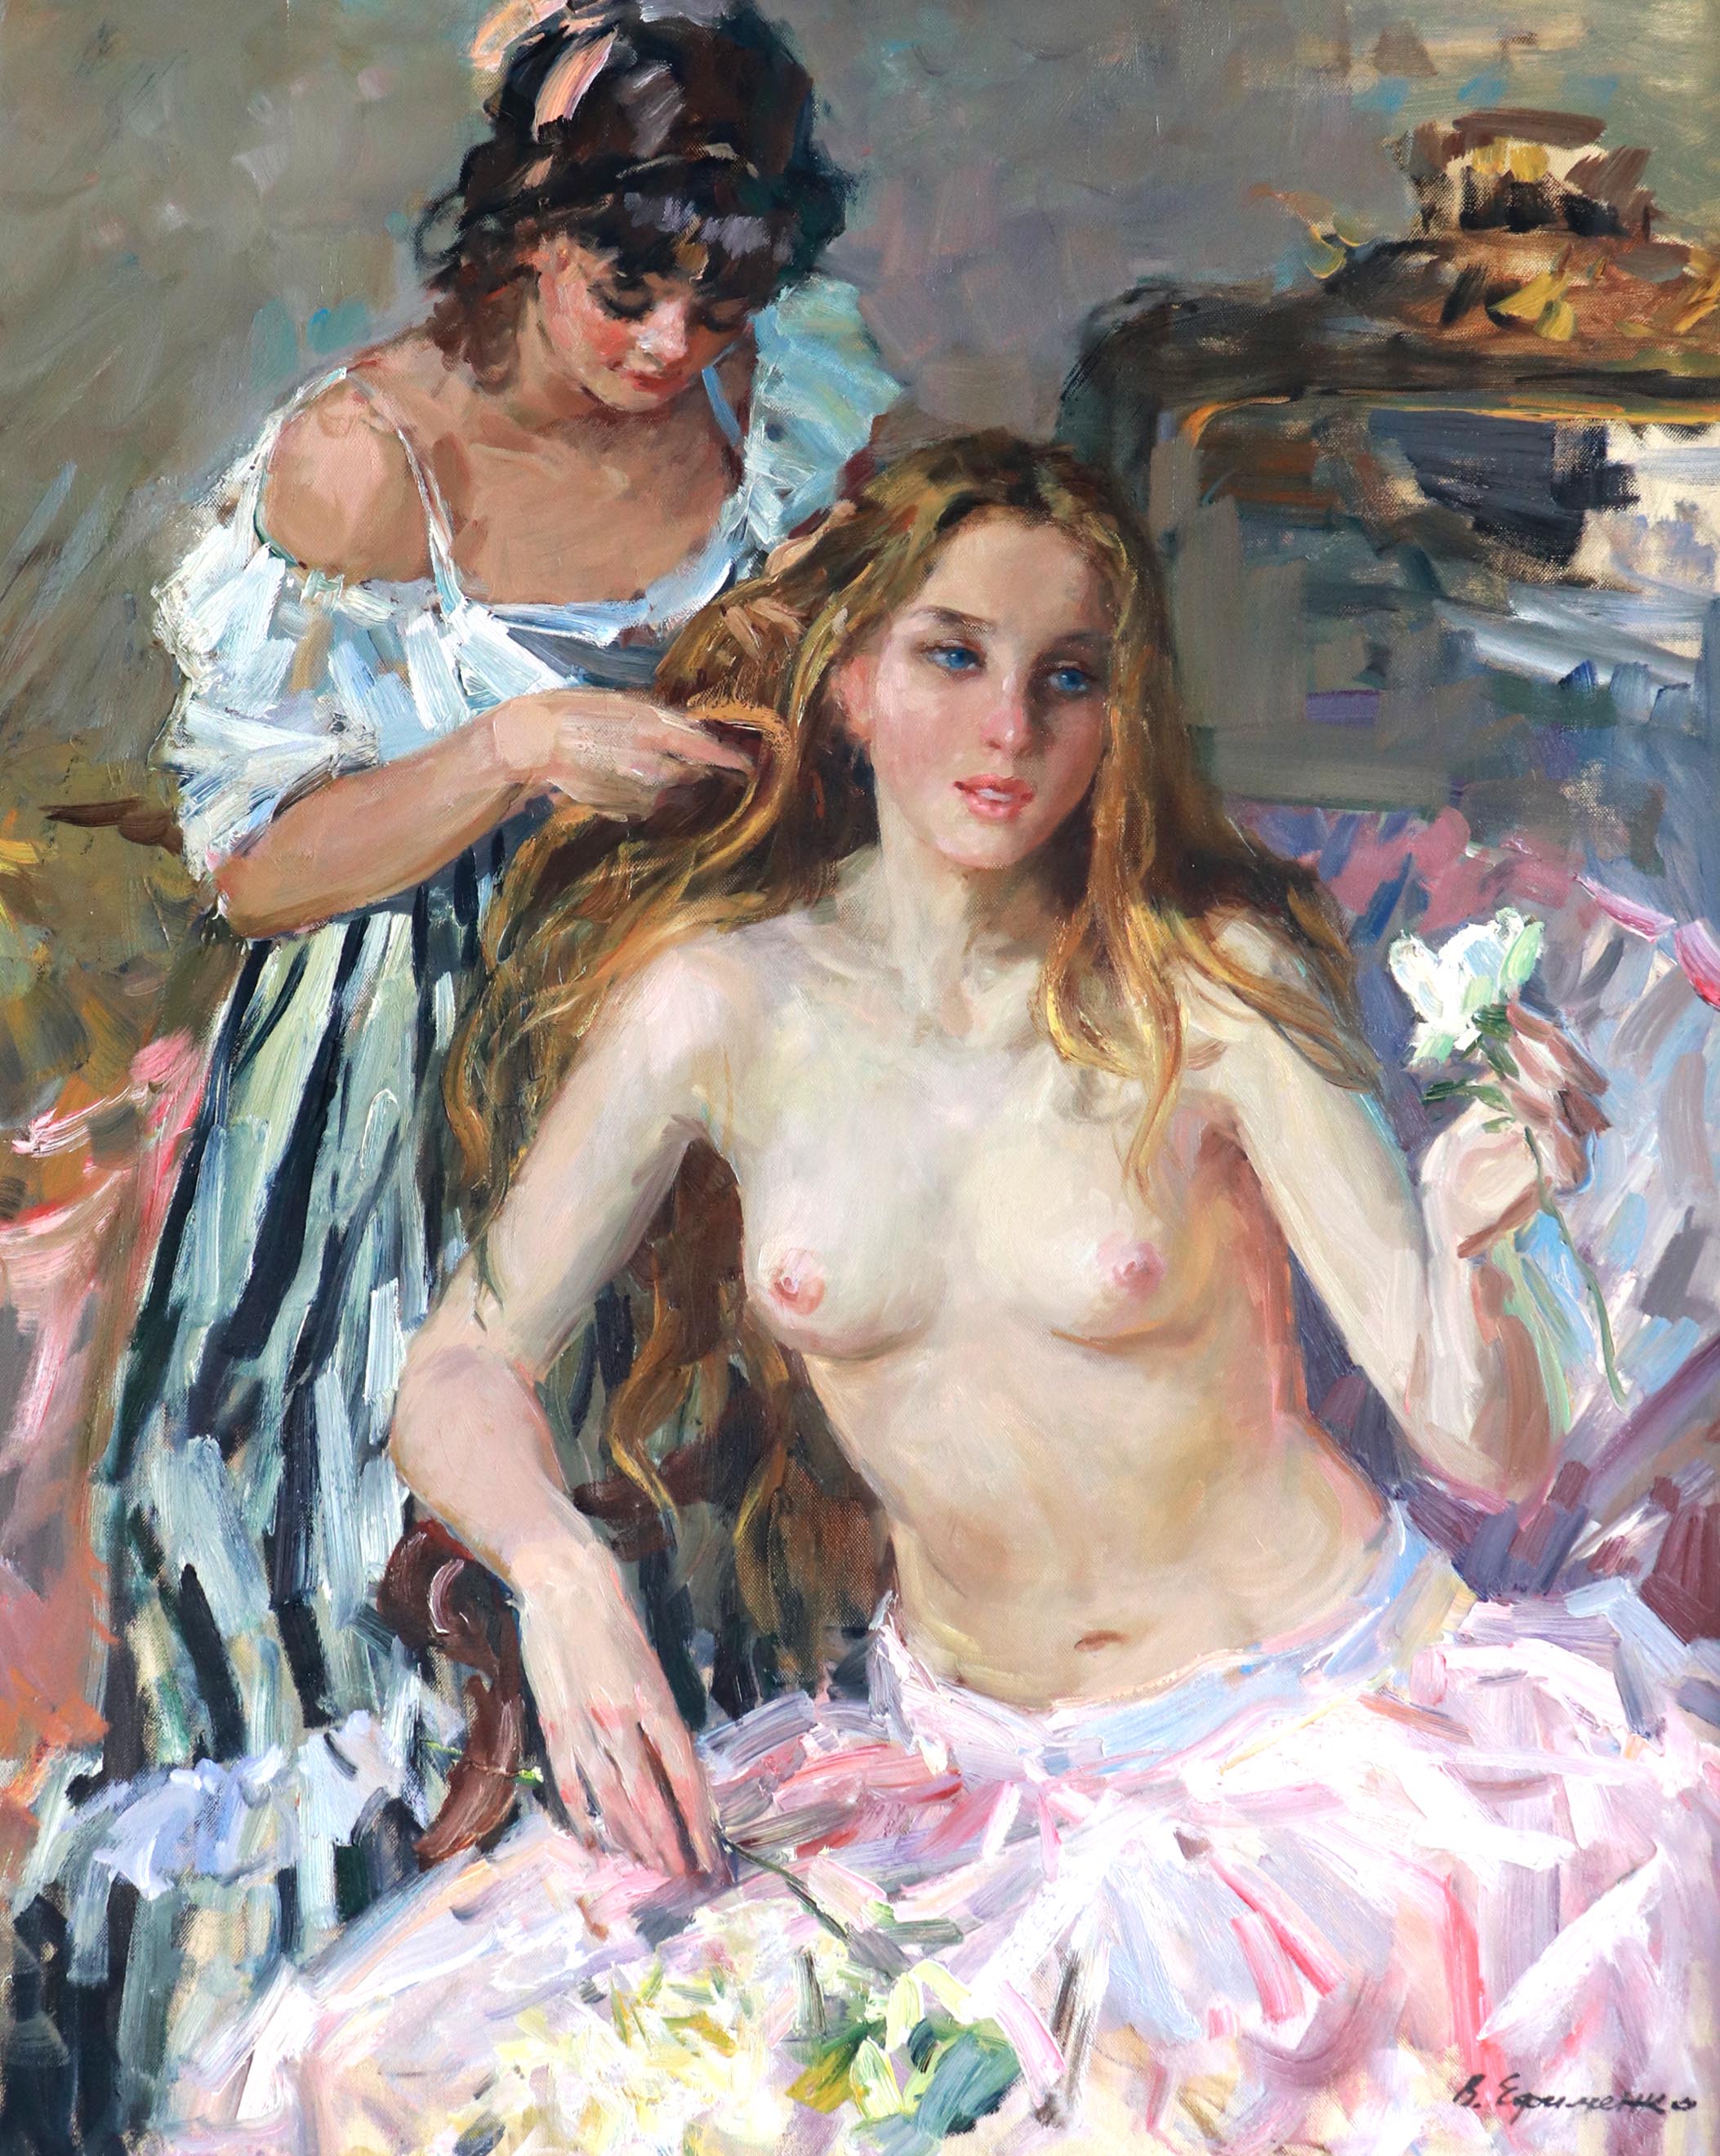 Victor Romanovich Efimenko (1952-2017) Russian. "The New Hairdo", a Semi Naked Woman, seated with